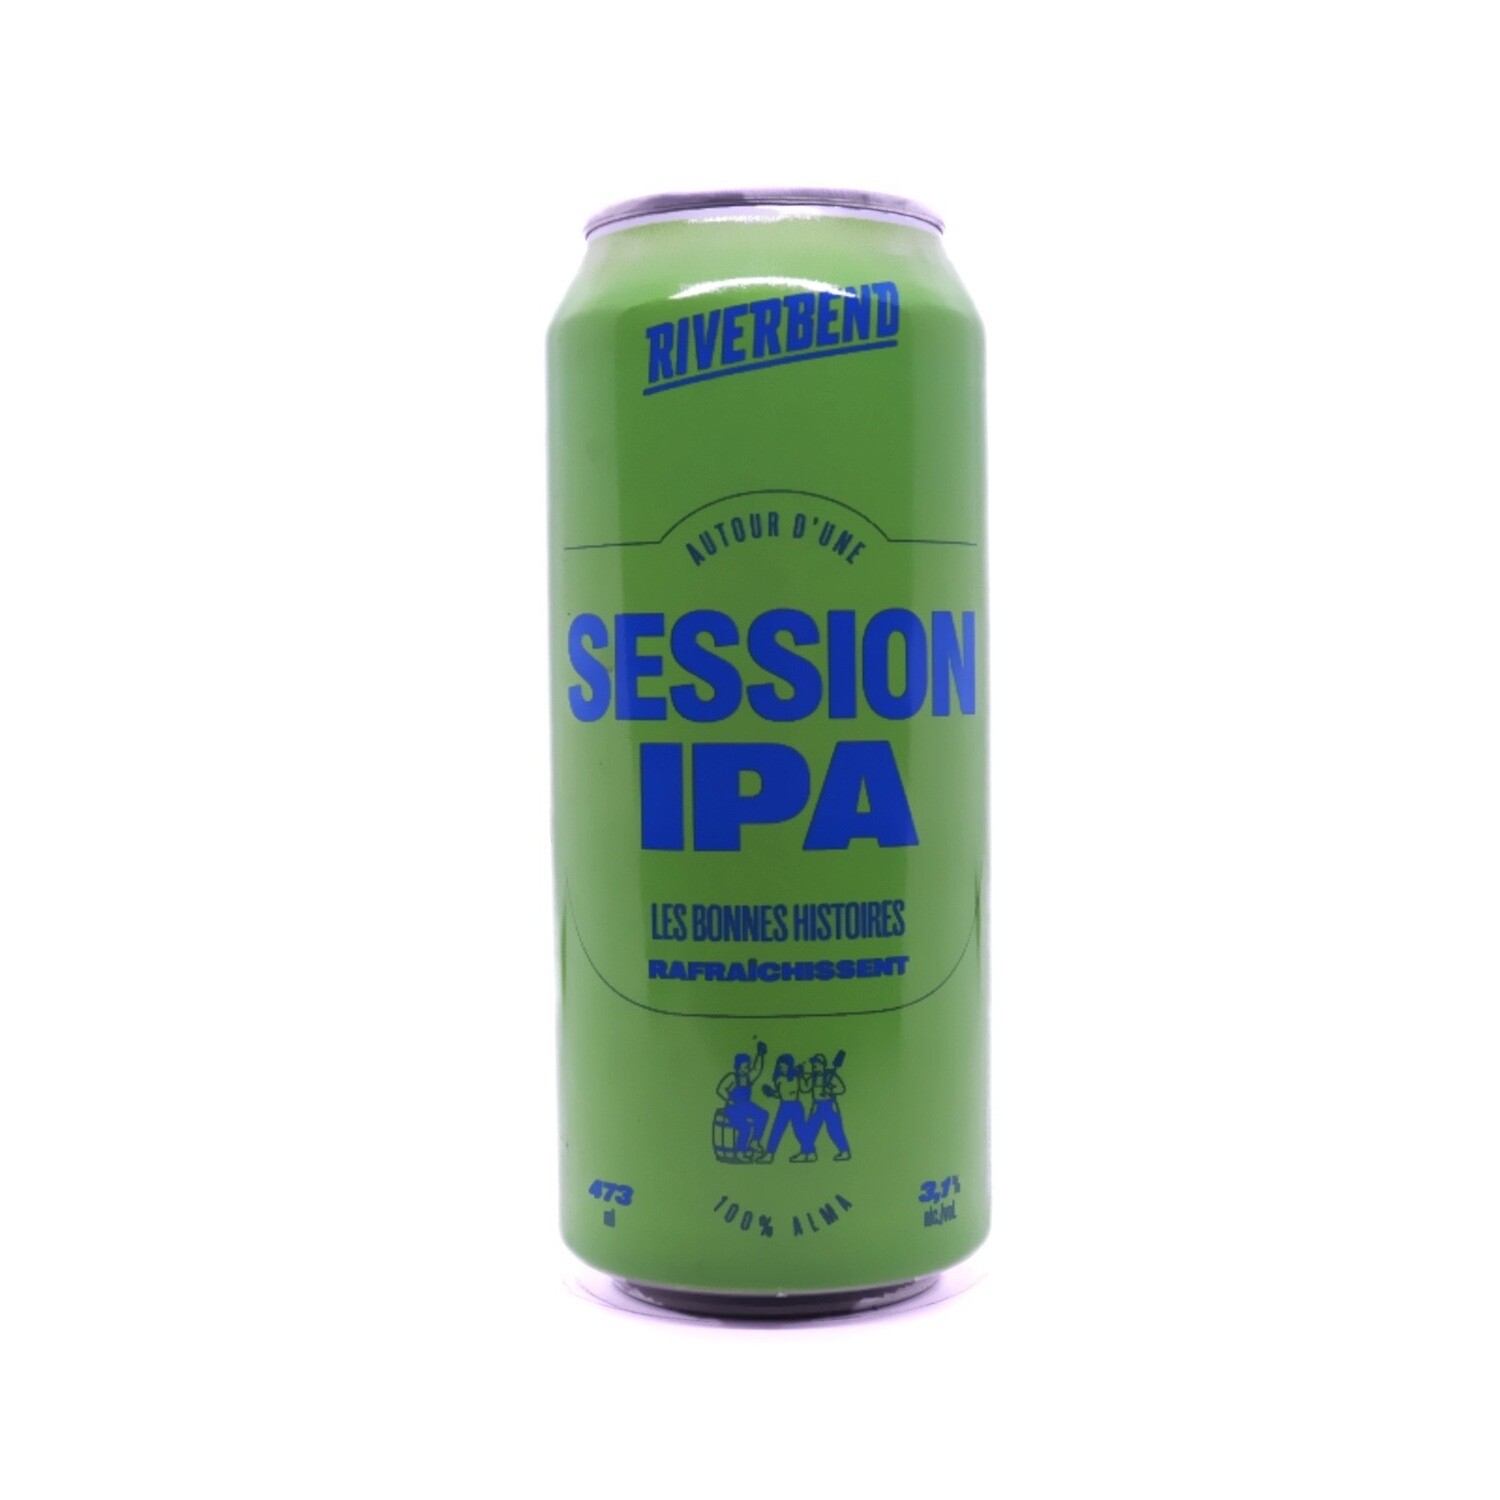 Riverbend - Session IPA